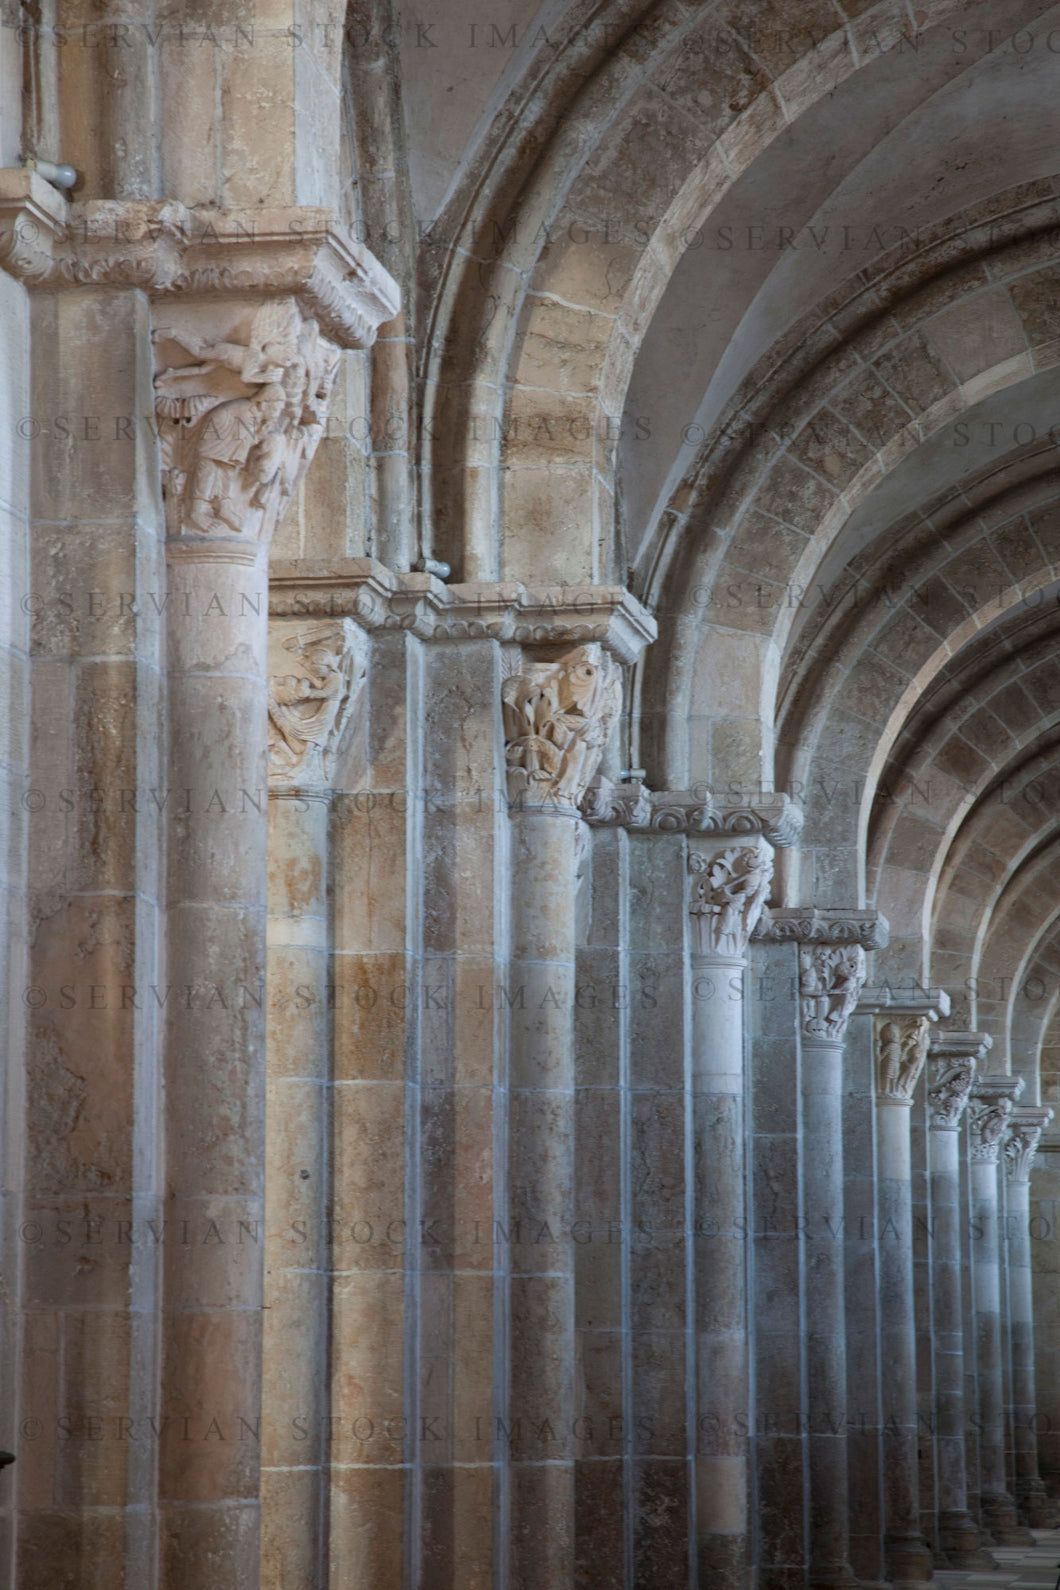 Historical building - Abbey interior, France (Nick 5932)